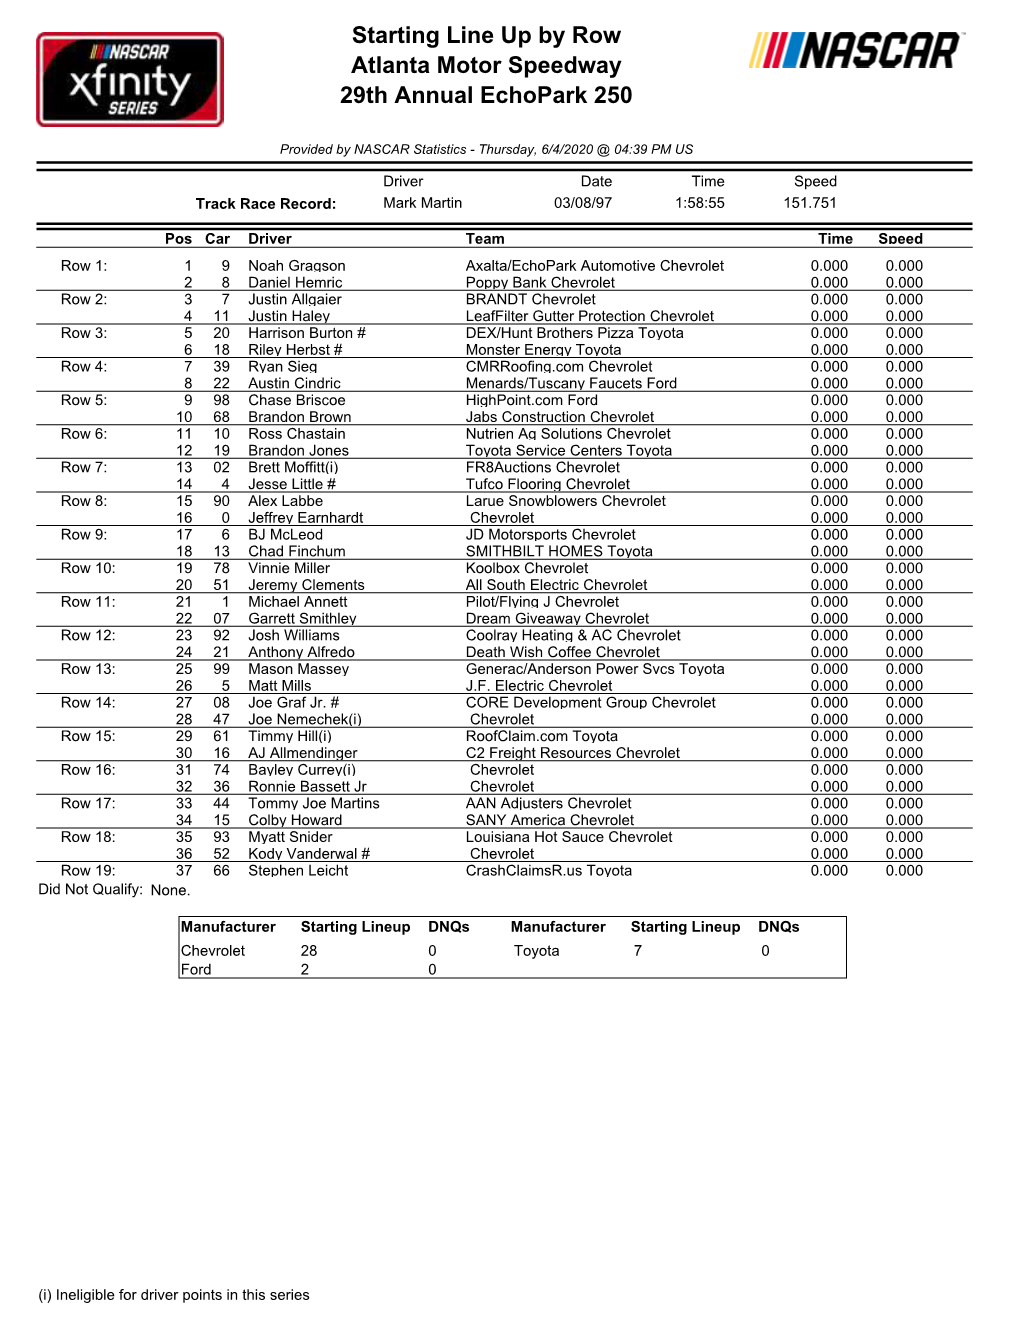 Starting Line up by Row Atlanta Motor Speedway 29Th Annual Echopark 250